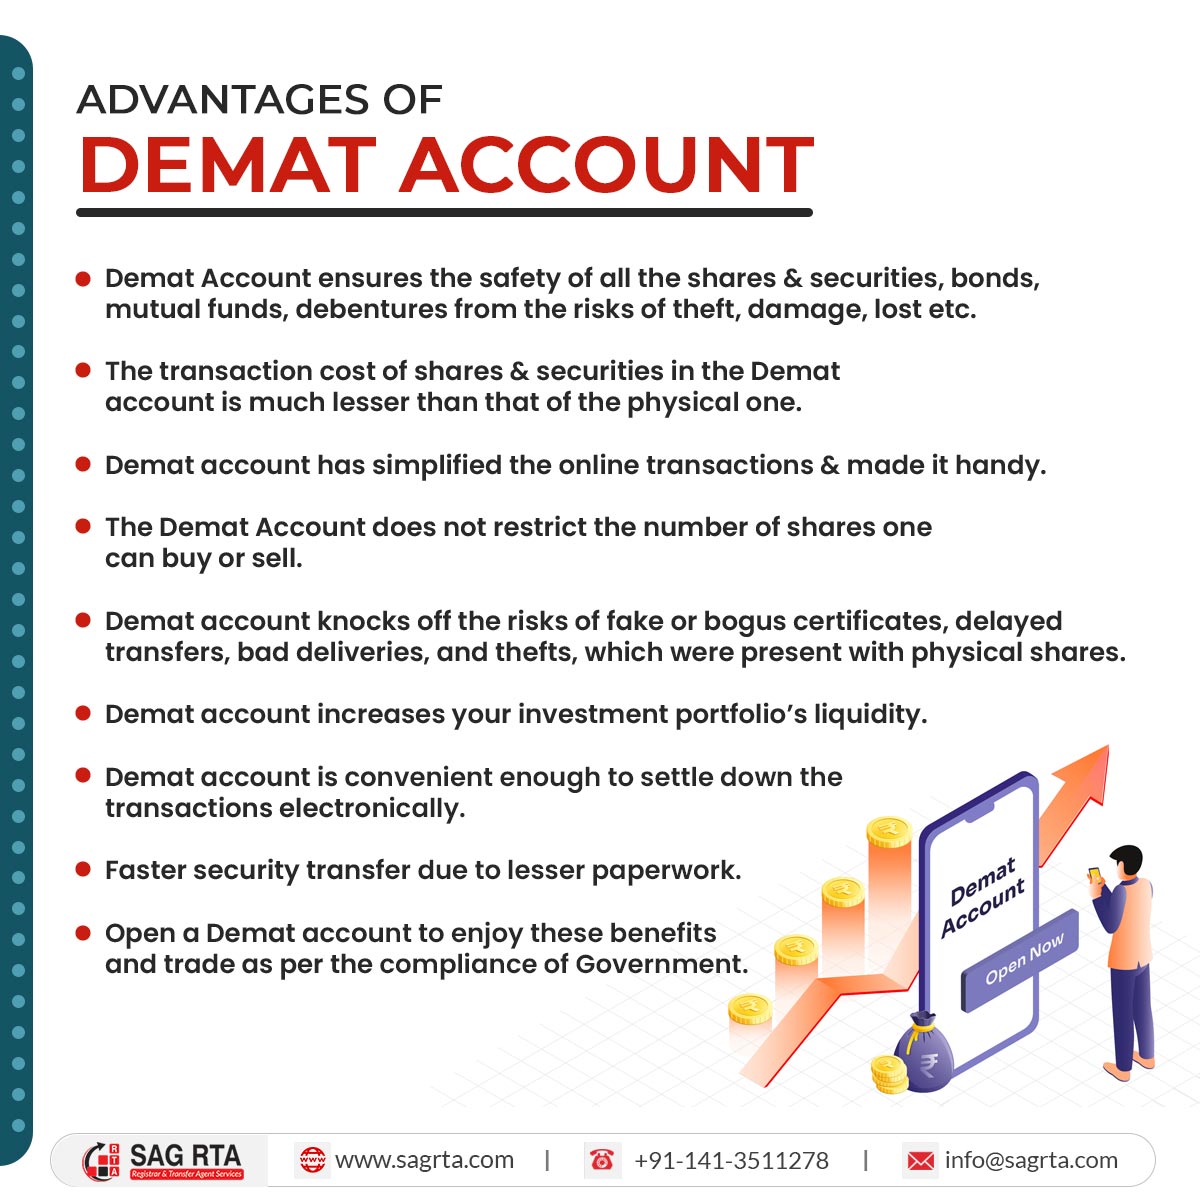 Learn about the benefits of having a Demat account.
bit.ly/3s8FeBZ
#DematAccount #shares #securities #bonds #mutualfunds #debentures #investment #SAGRTA #clients #professionals #CDSL #NSDL #registrarandtransferagent #Registrarandsharetransferagent #rtaservices #rtaforms